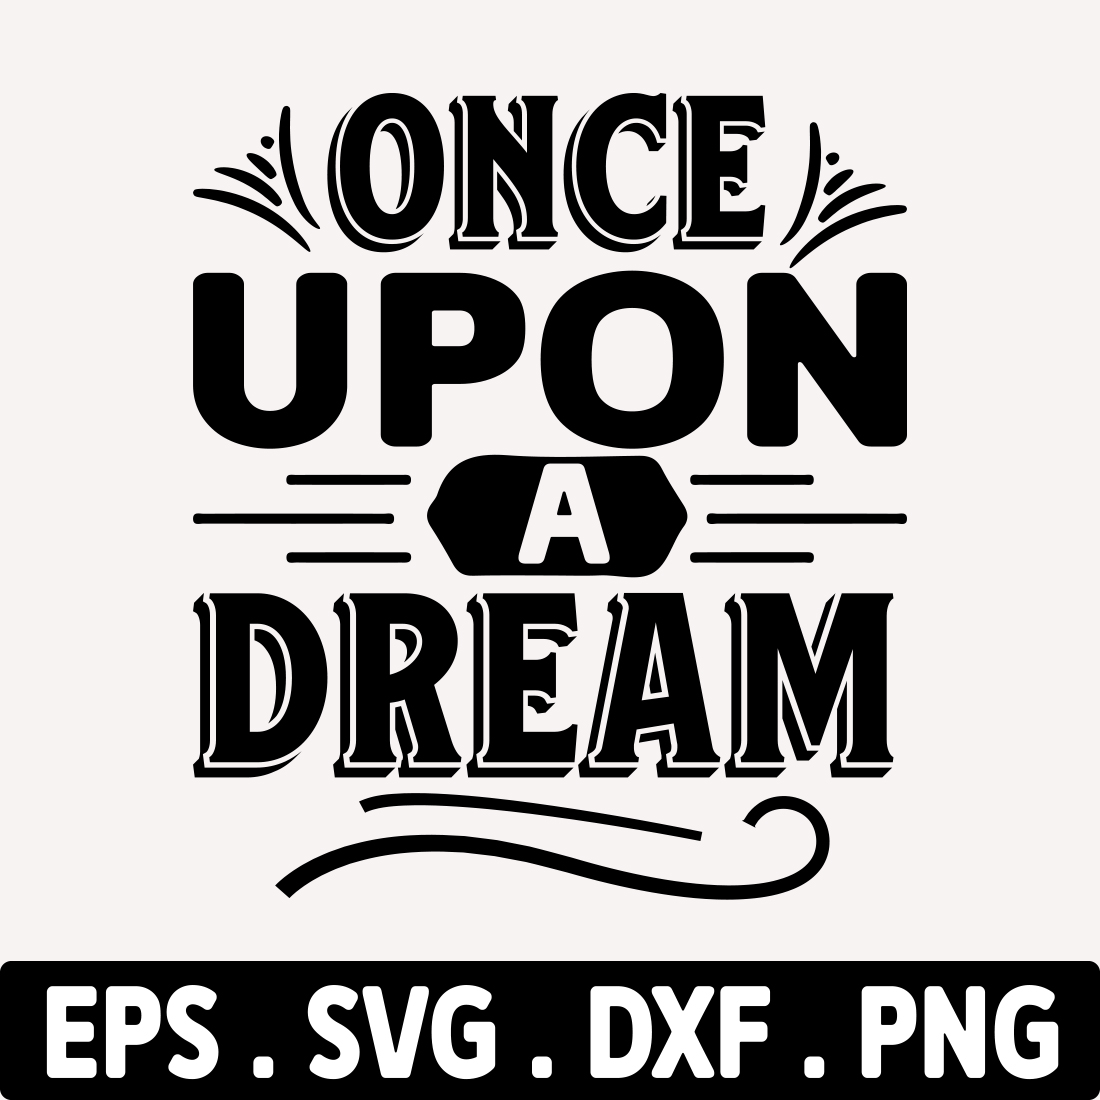 Once Upon a Dream svg cover image.